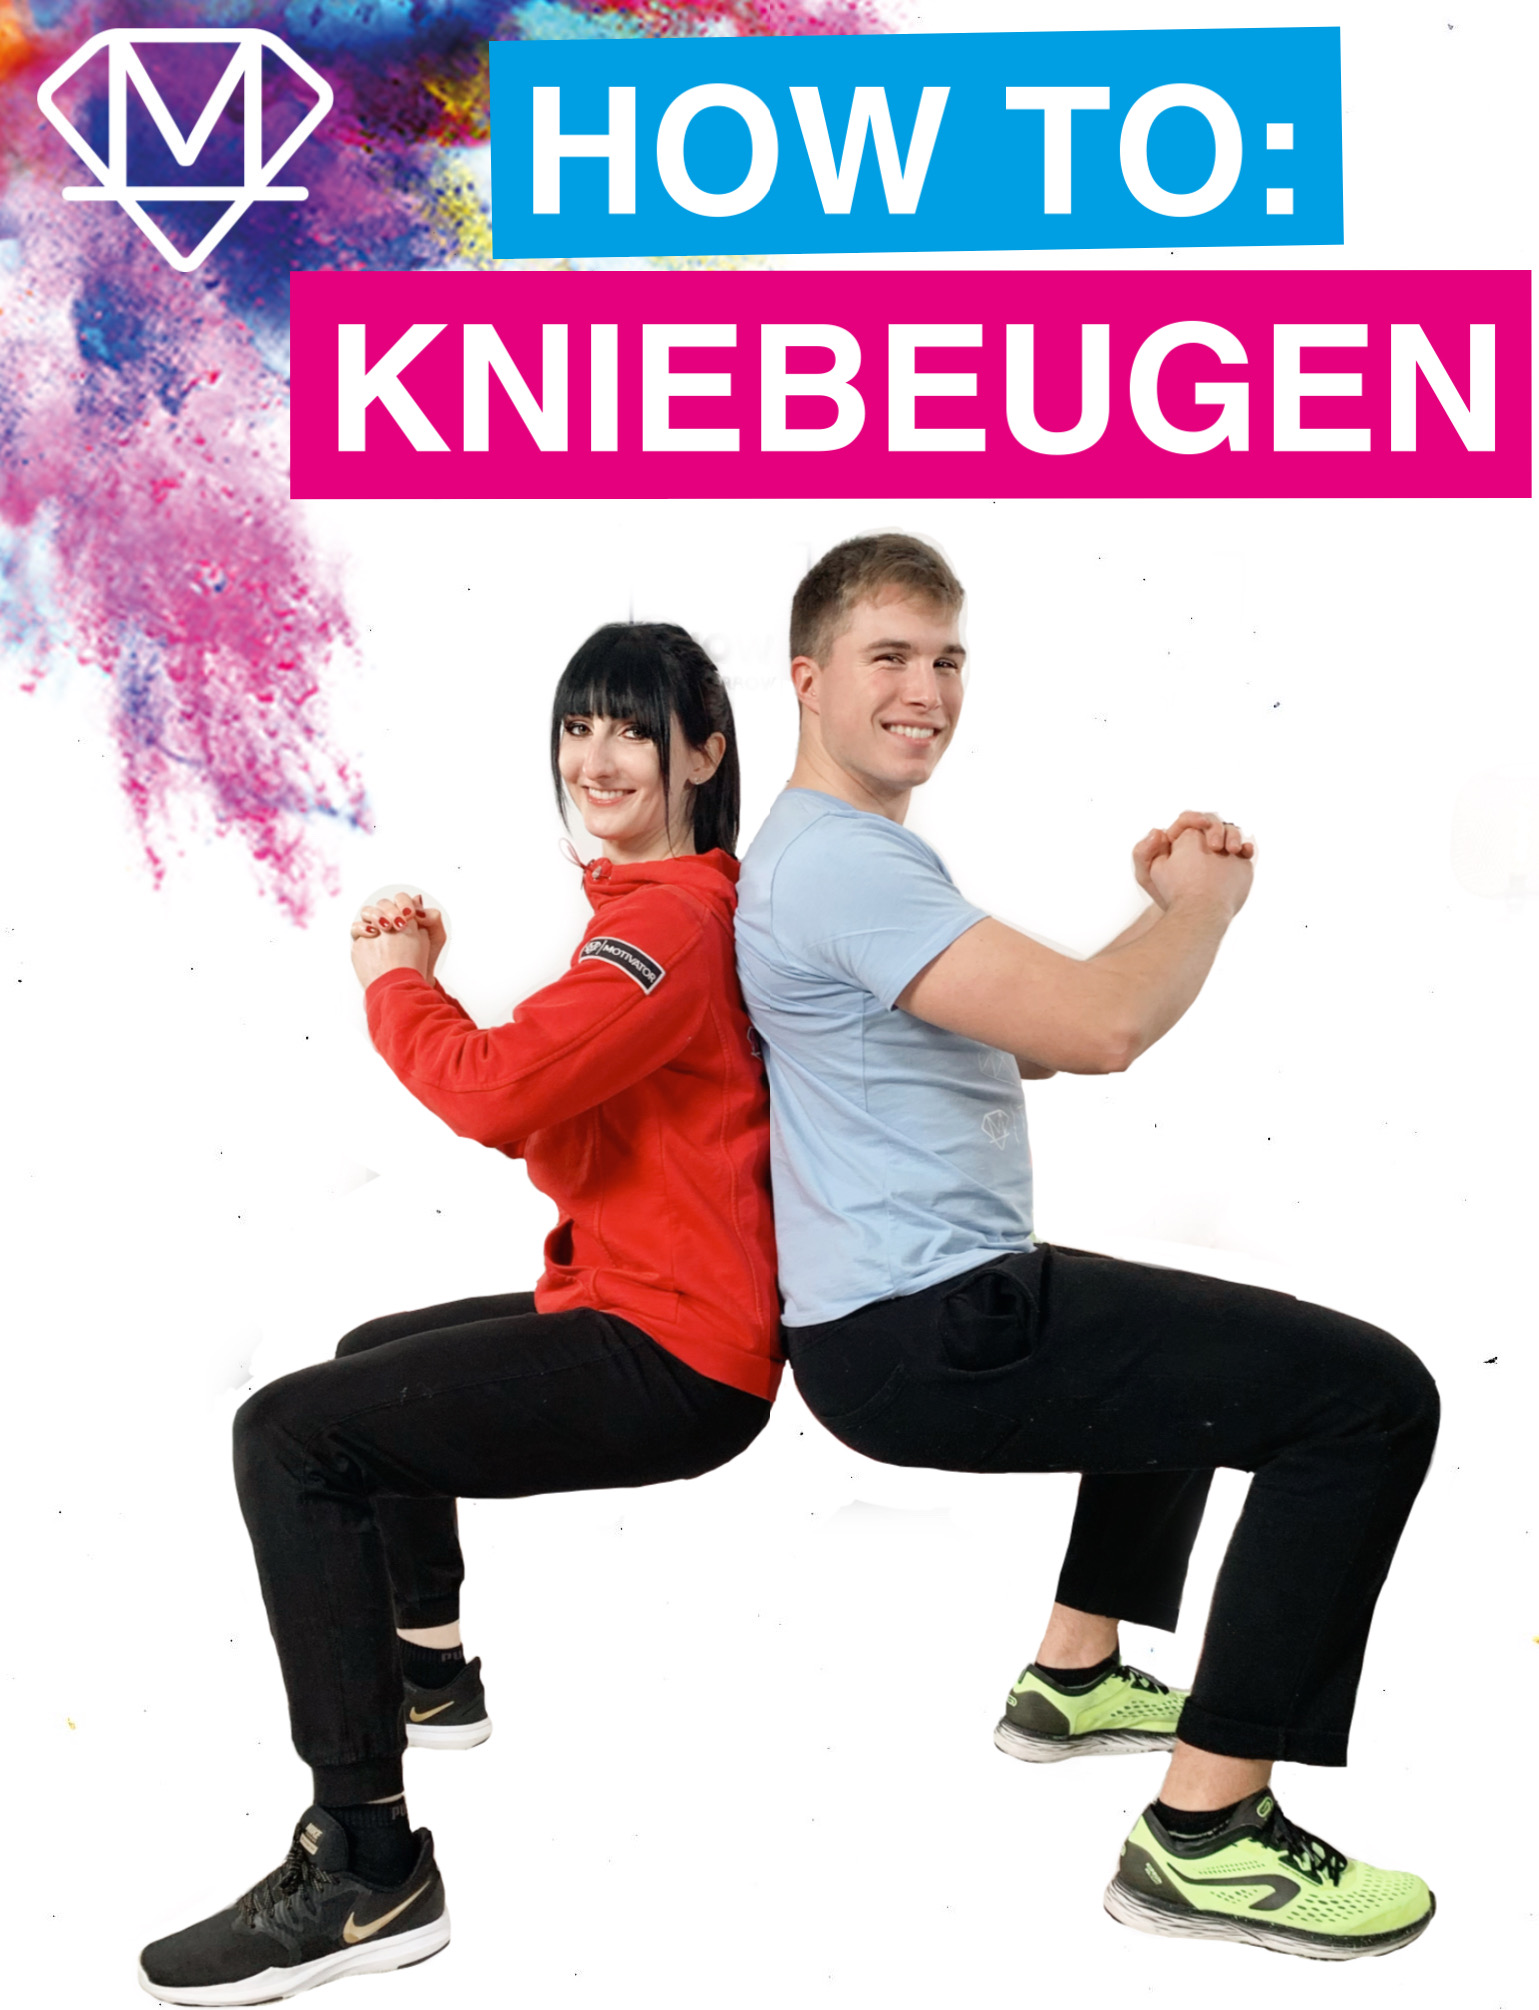 How to: Kniebeugen